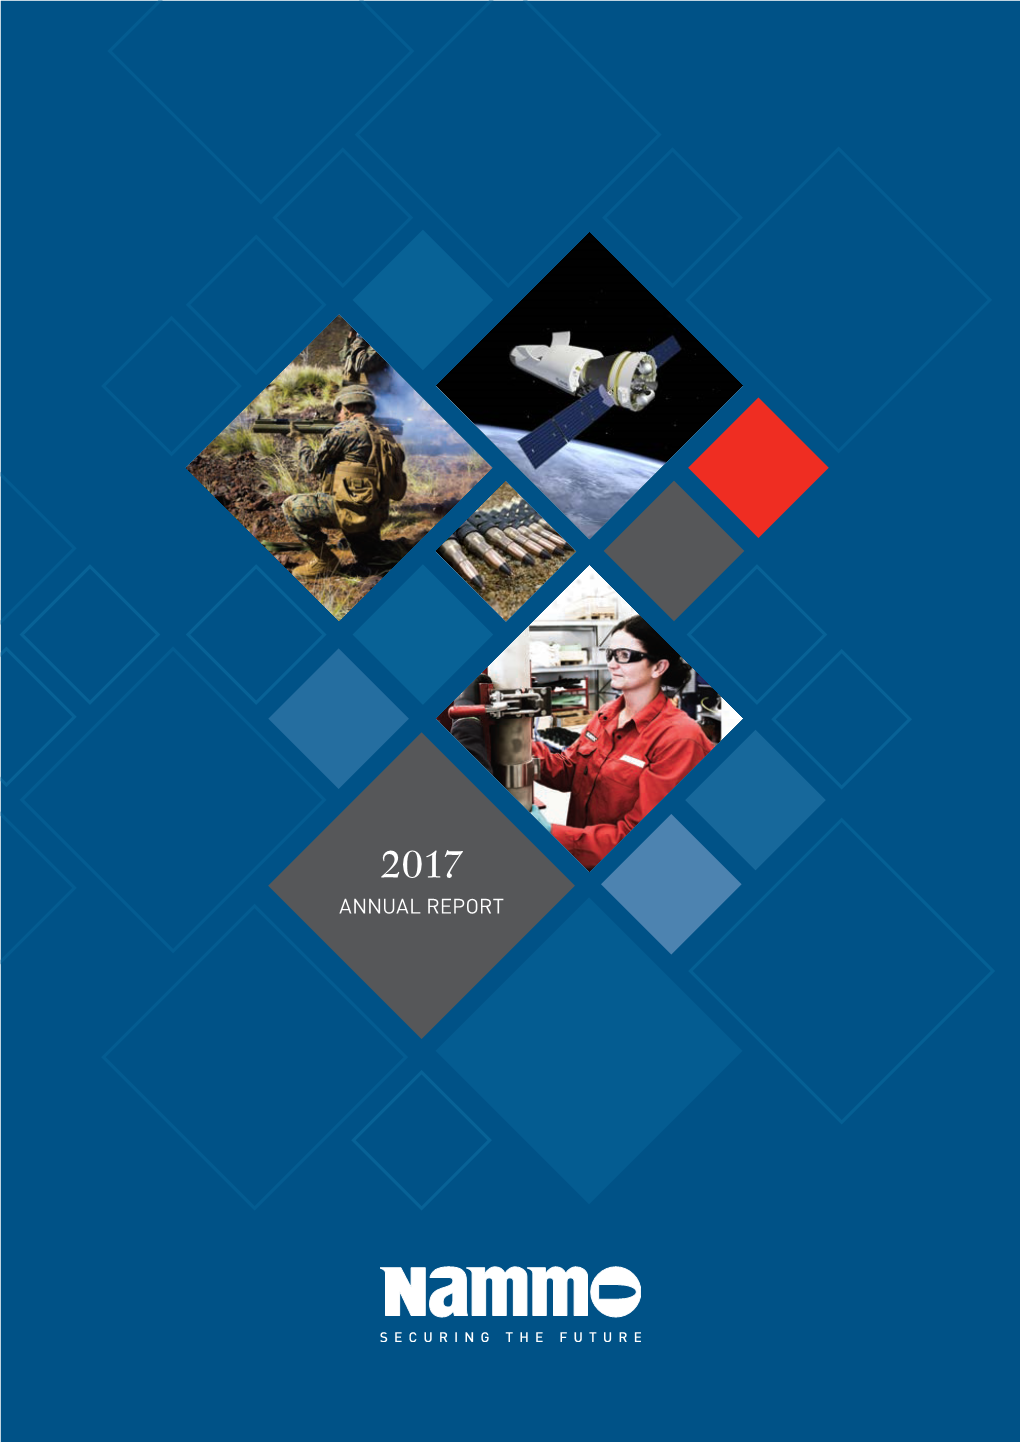 ANNUAL REPORT Contents CONTENTS